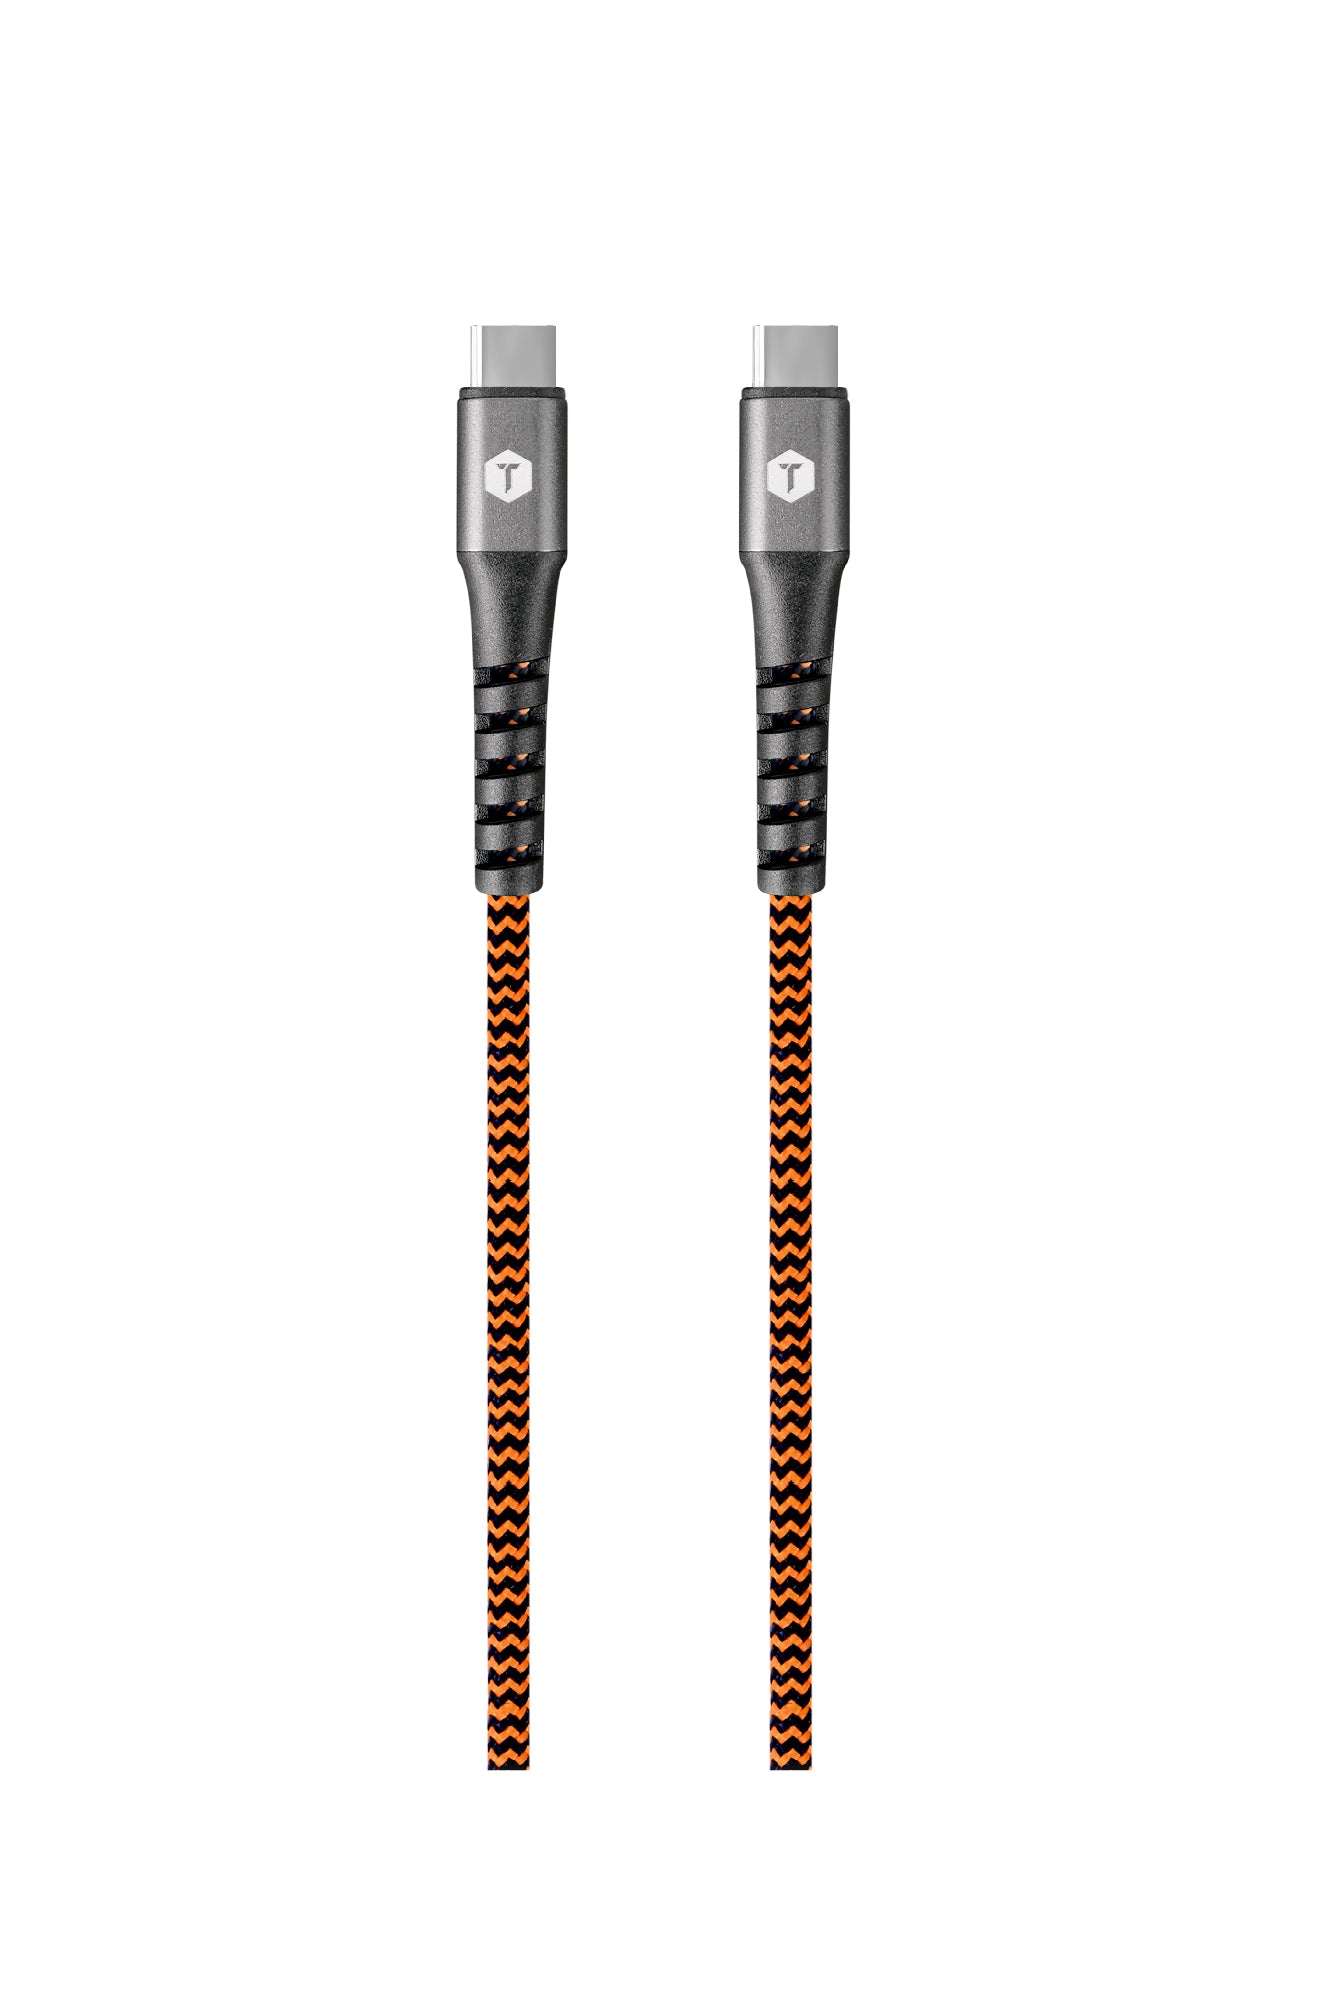 Braided 6 Ft. USB-C to USB-C Cable